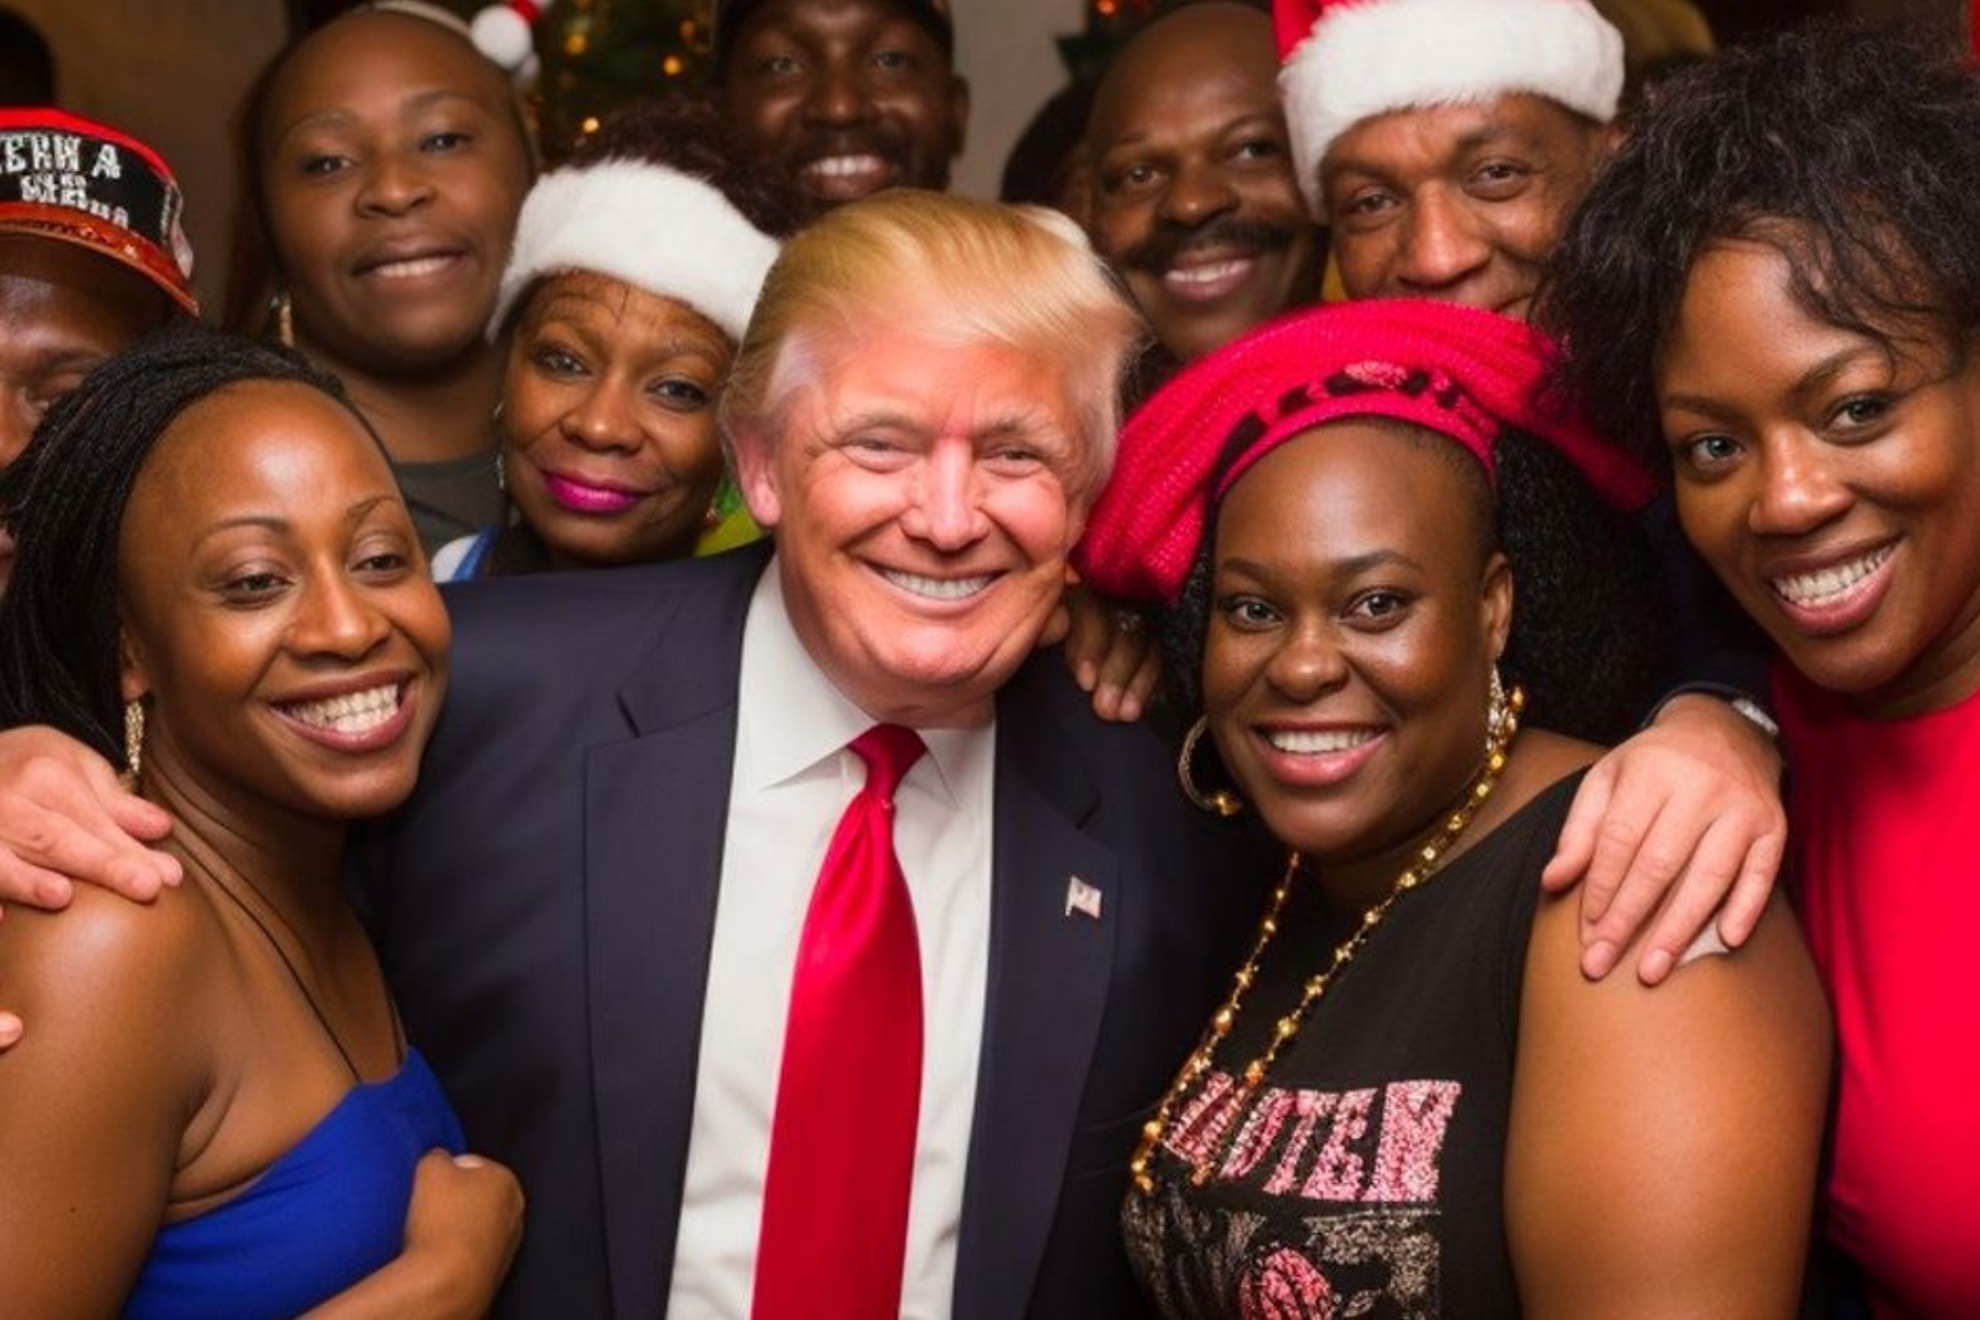 MAGA supporters have posted fake AI images of Donald Trump embracing black people